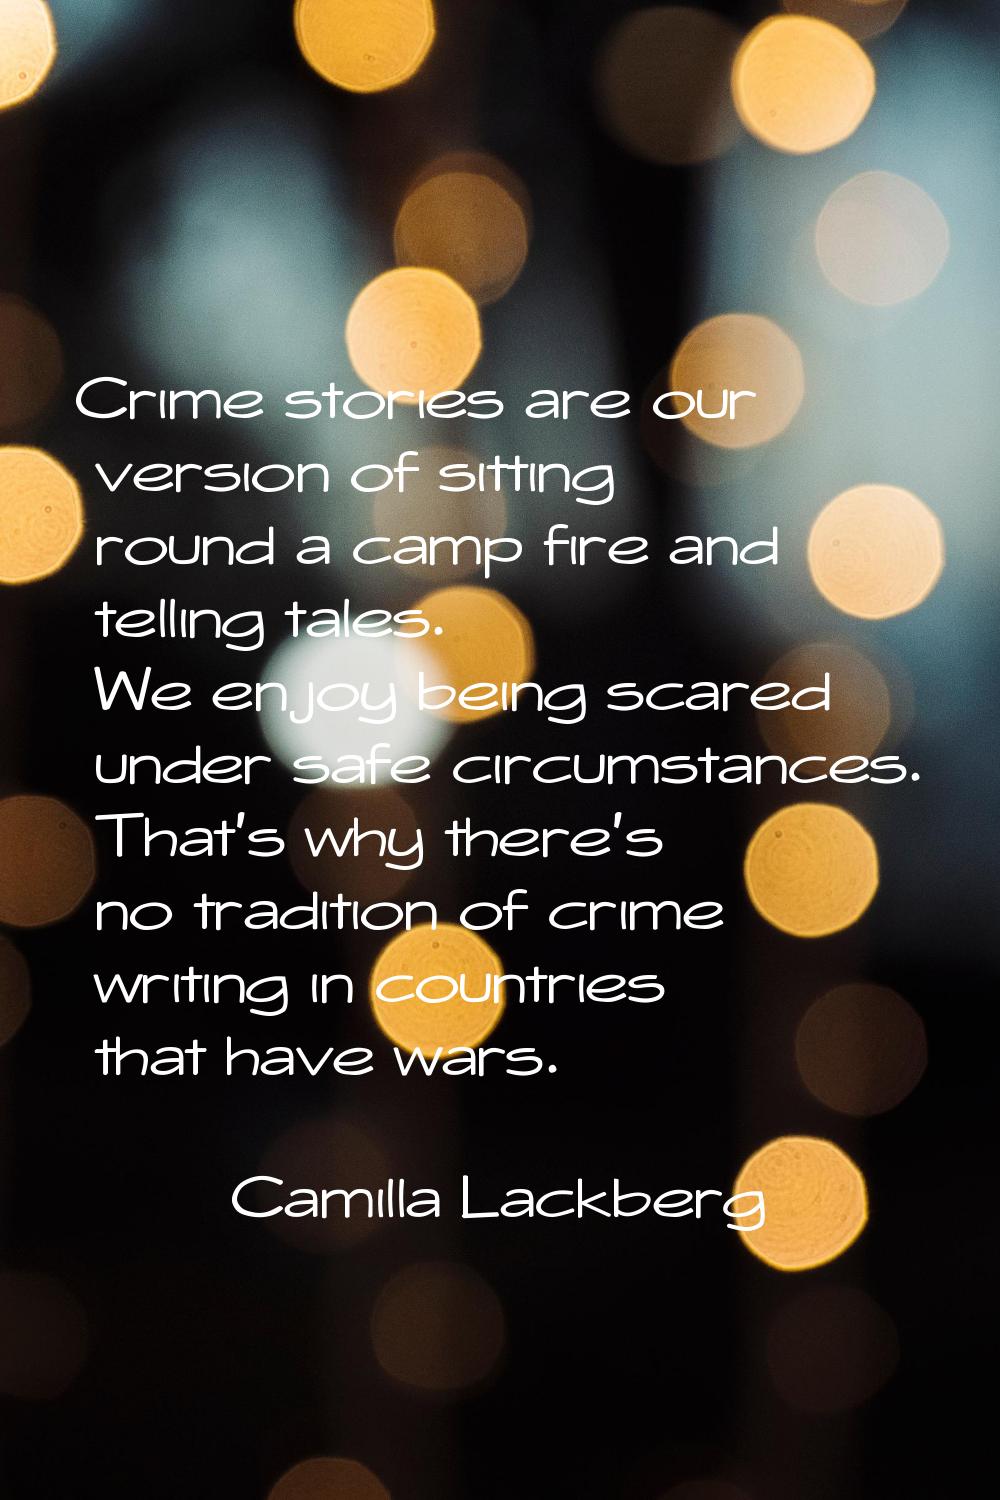 Crime stories are our version of sitting round a camp fire and telling tales. We enjoy being scared